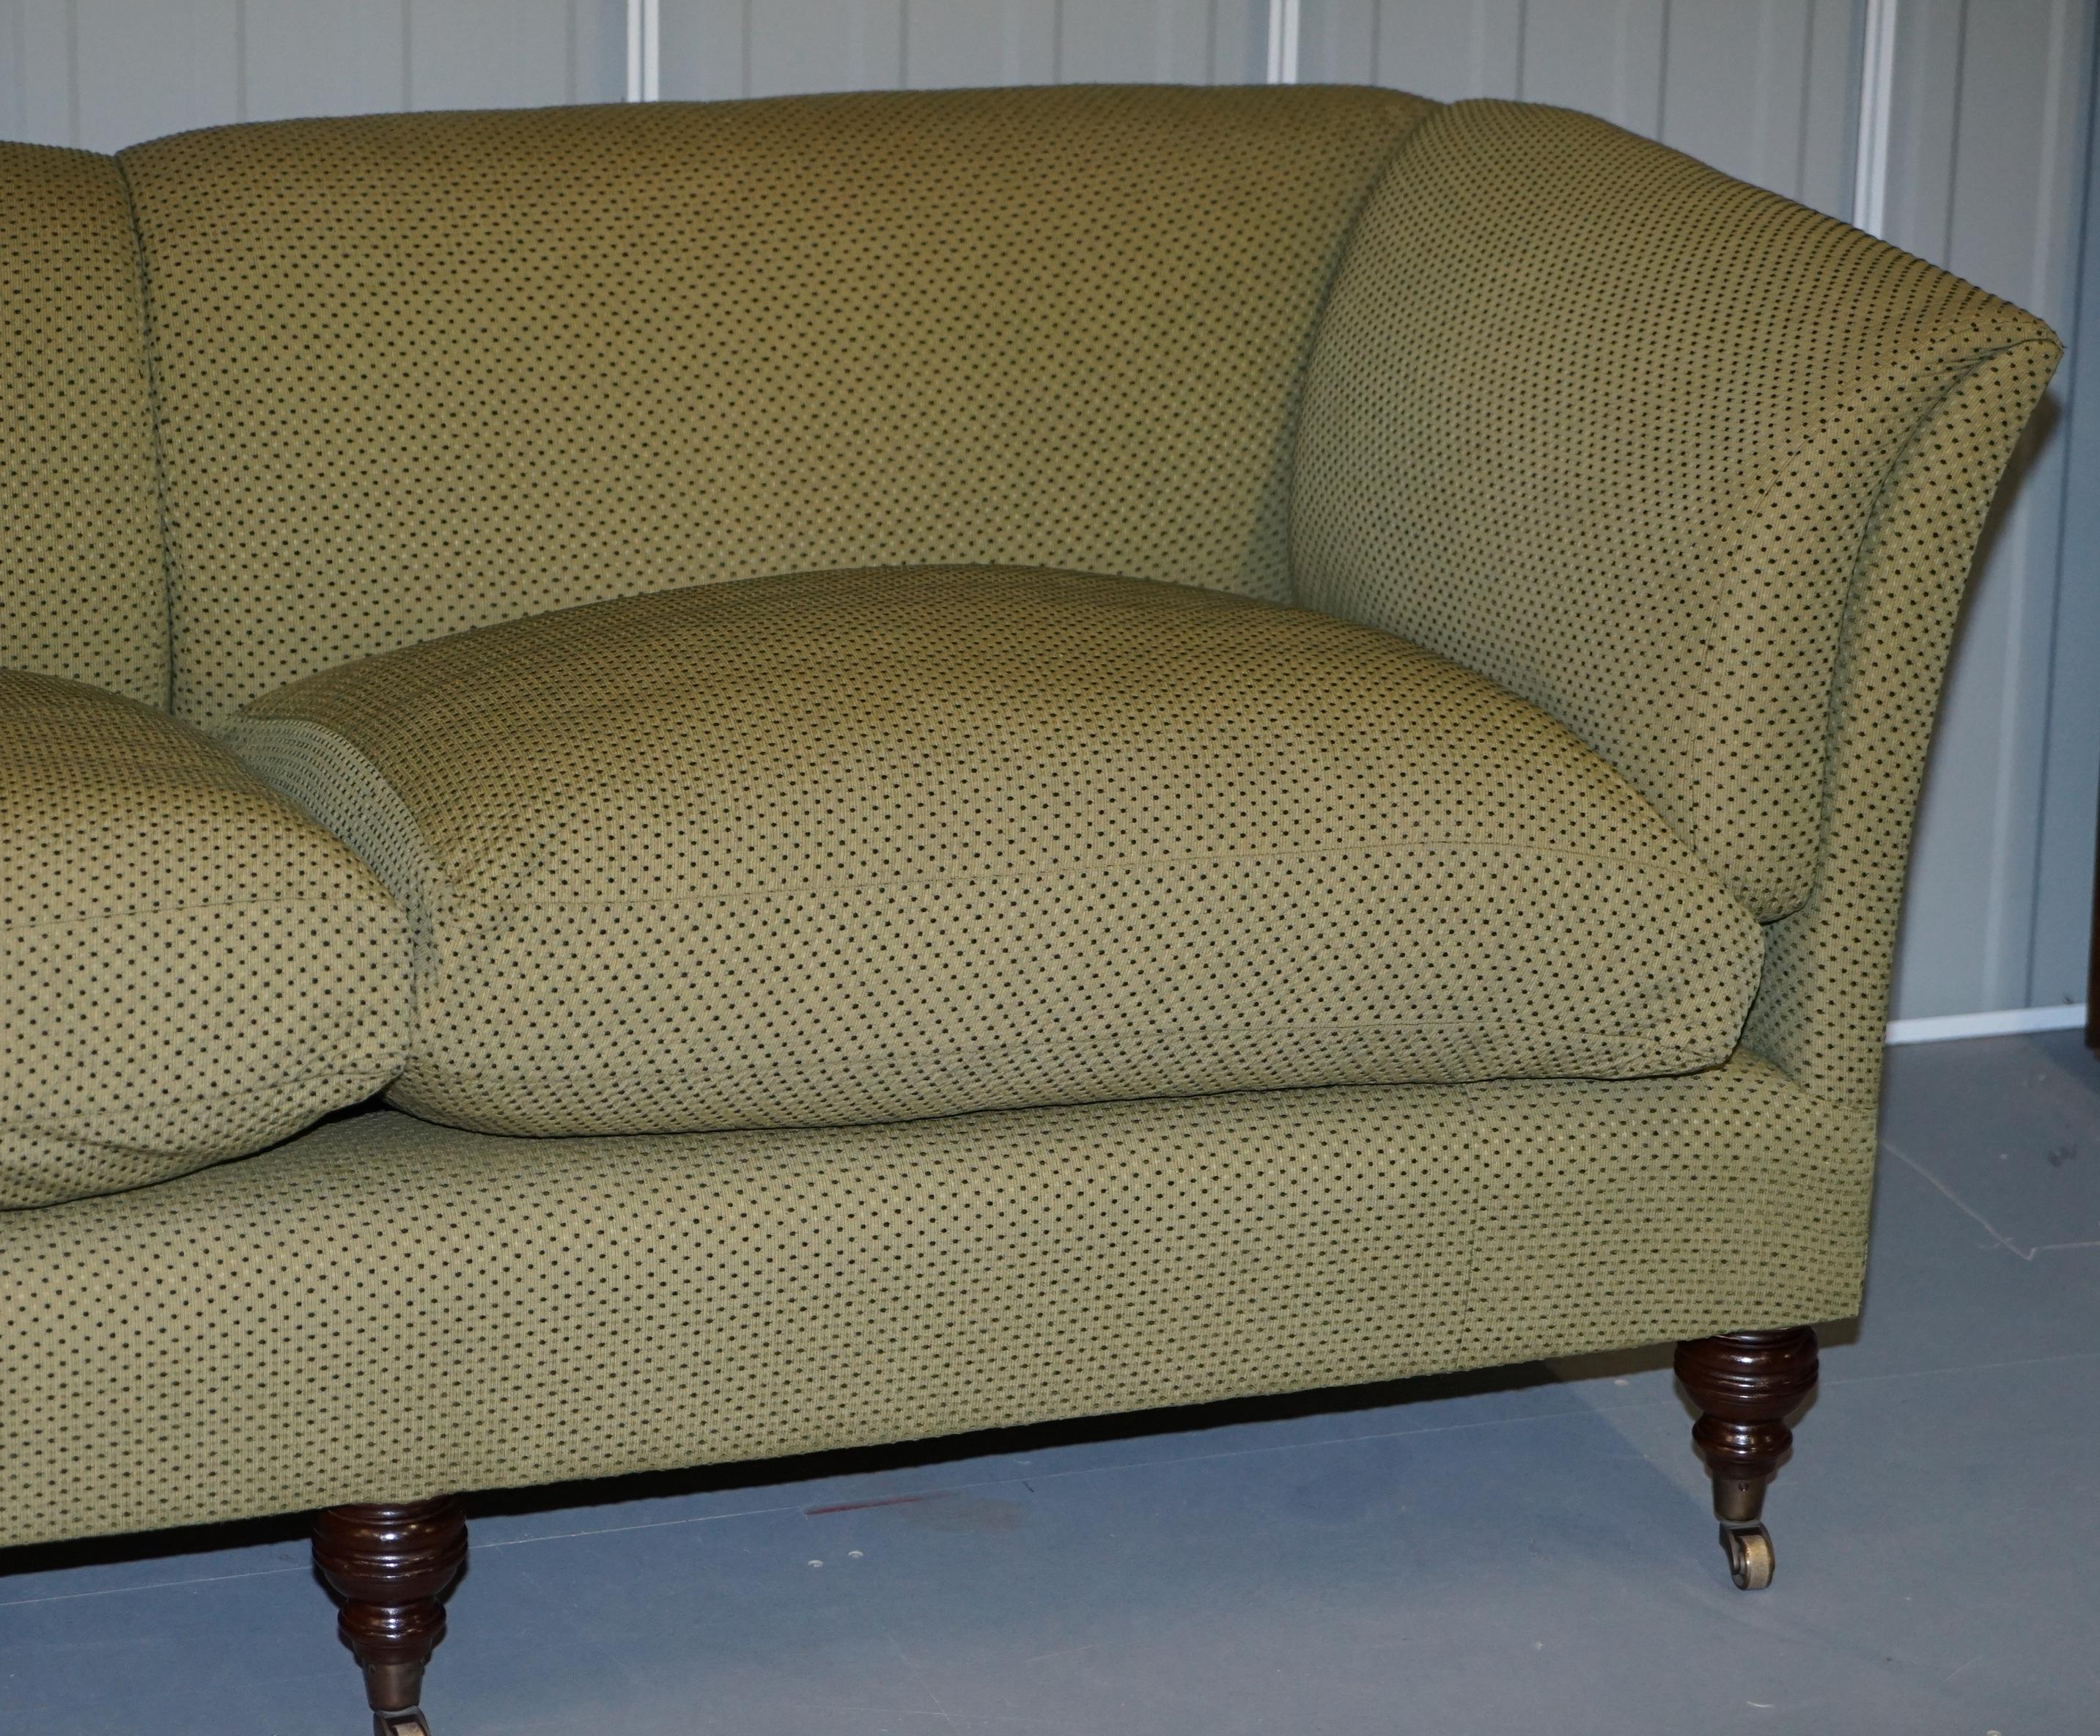 English Stunning Beaumont & Fletcher Pompadour Sofa Feather Filled Cushions